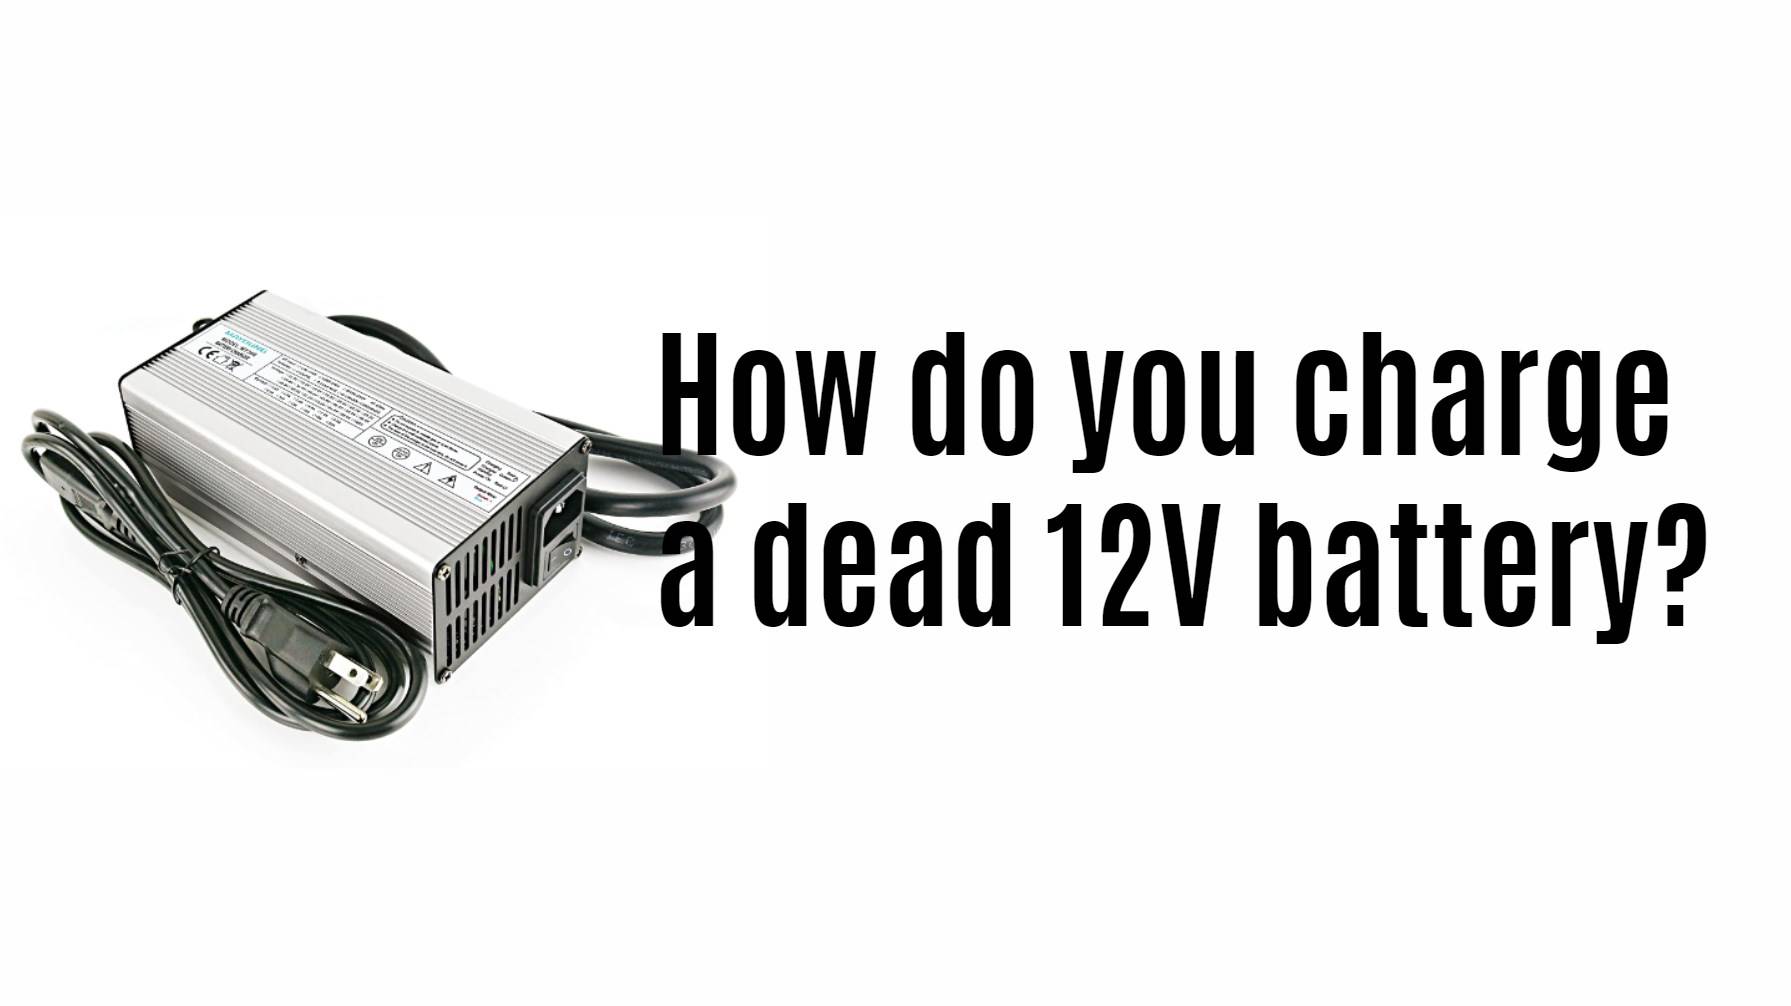 How do you charge a dead 12v battery?